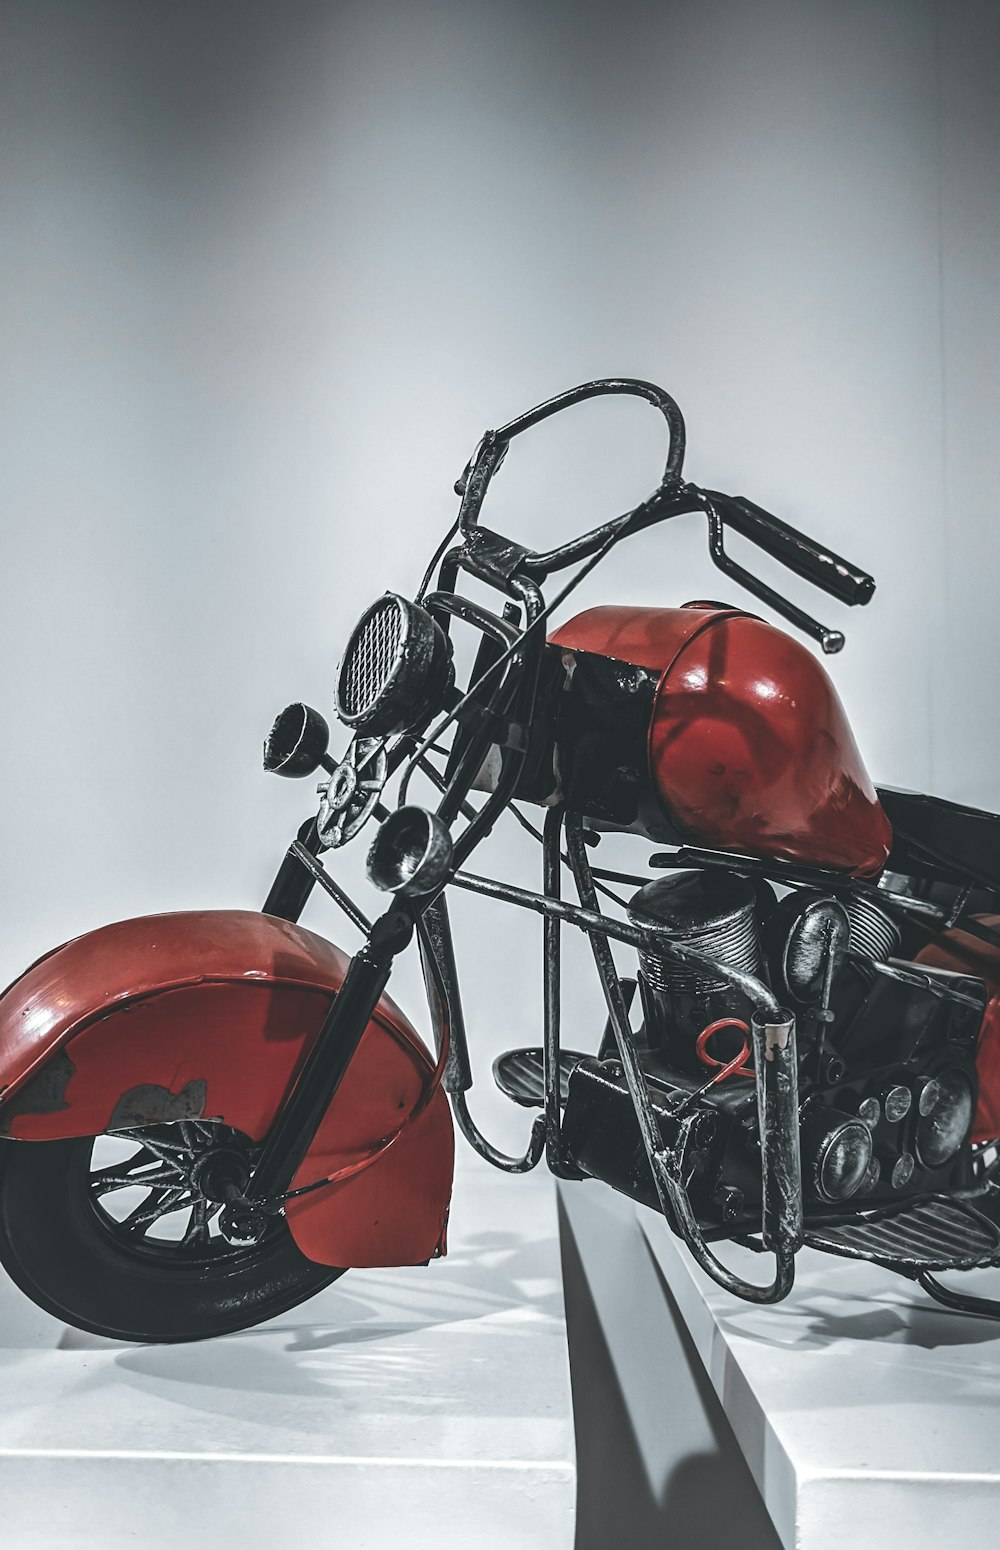 red and black motorcycle scale model